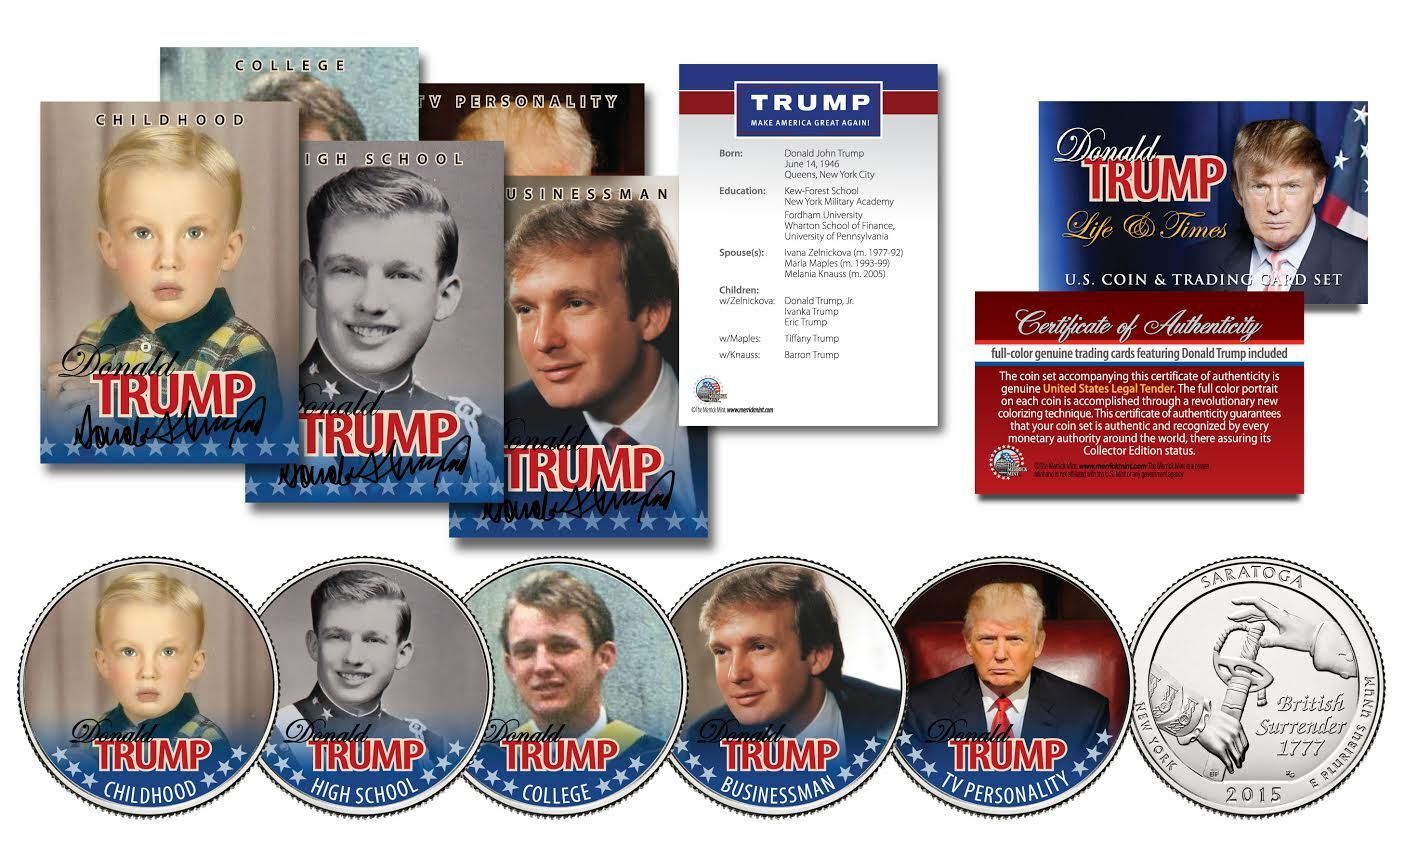 DONALD TRUMP Life & Times 10 Piece Ultimate U.S Coin & Trading Card Collection 